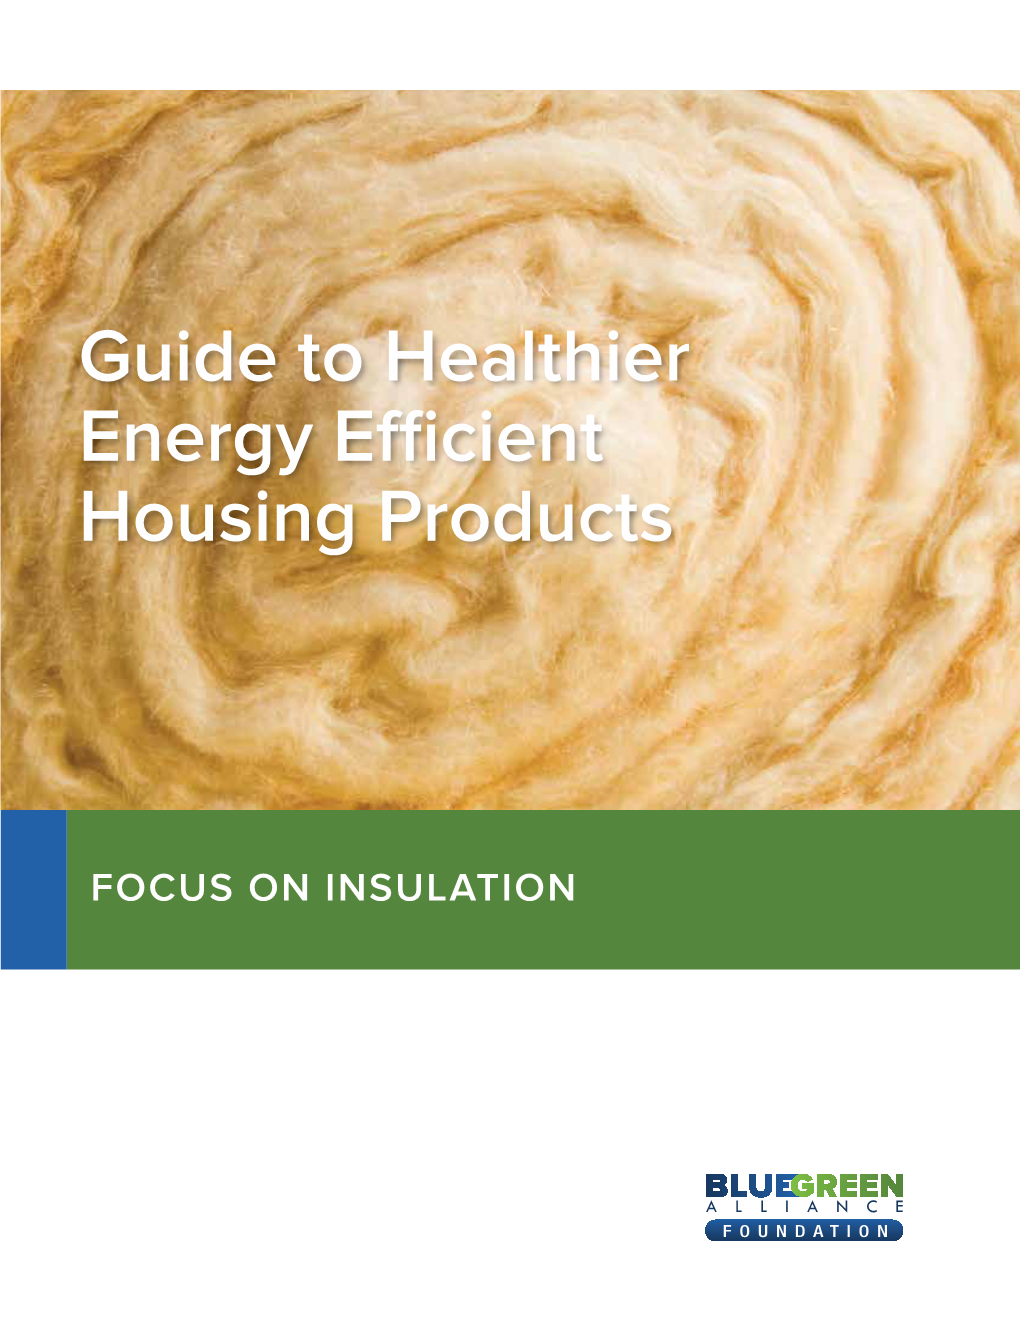 INSULATION a Guide to Healthier Energy Efficient Housing Products